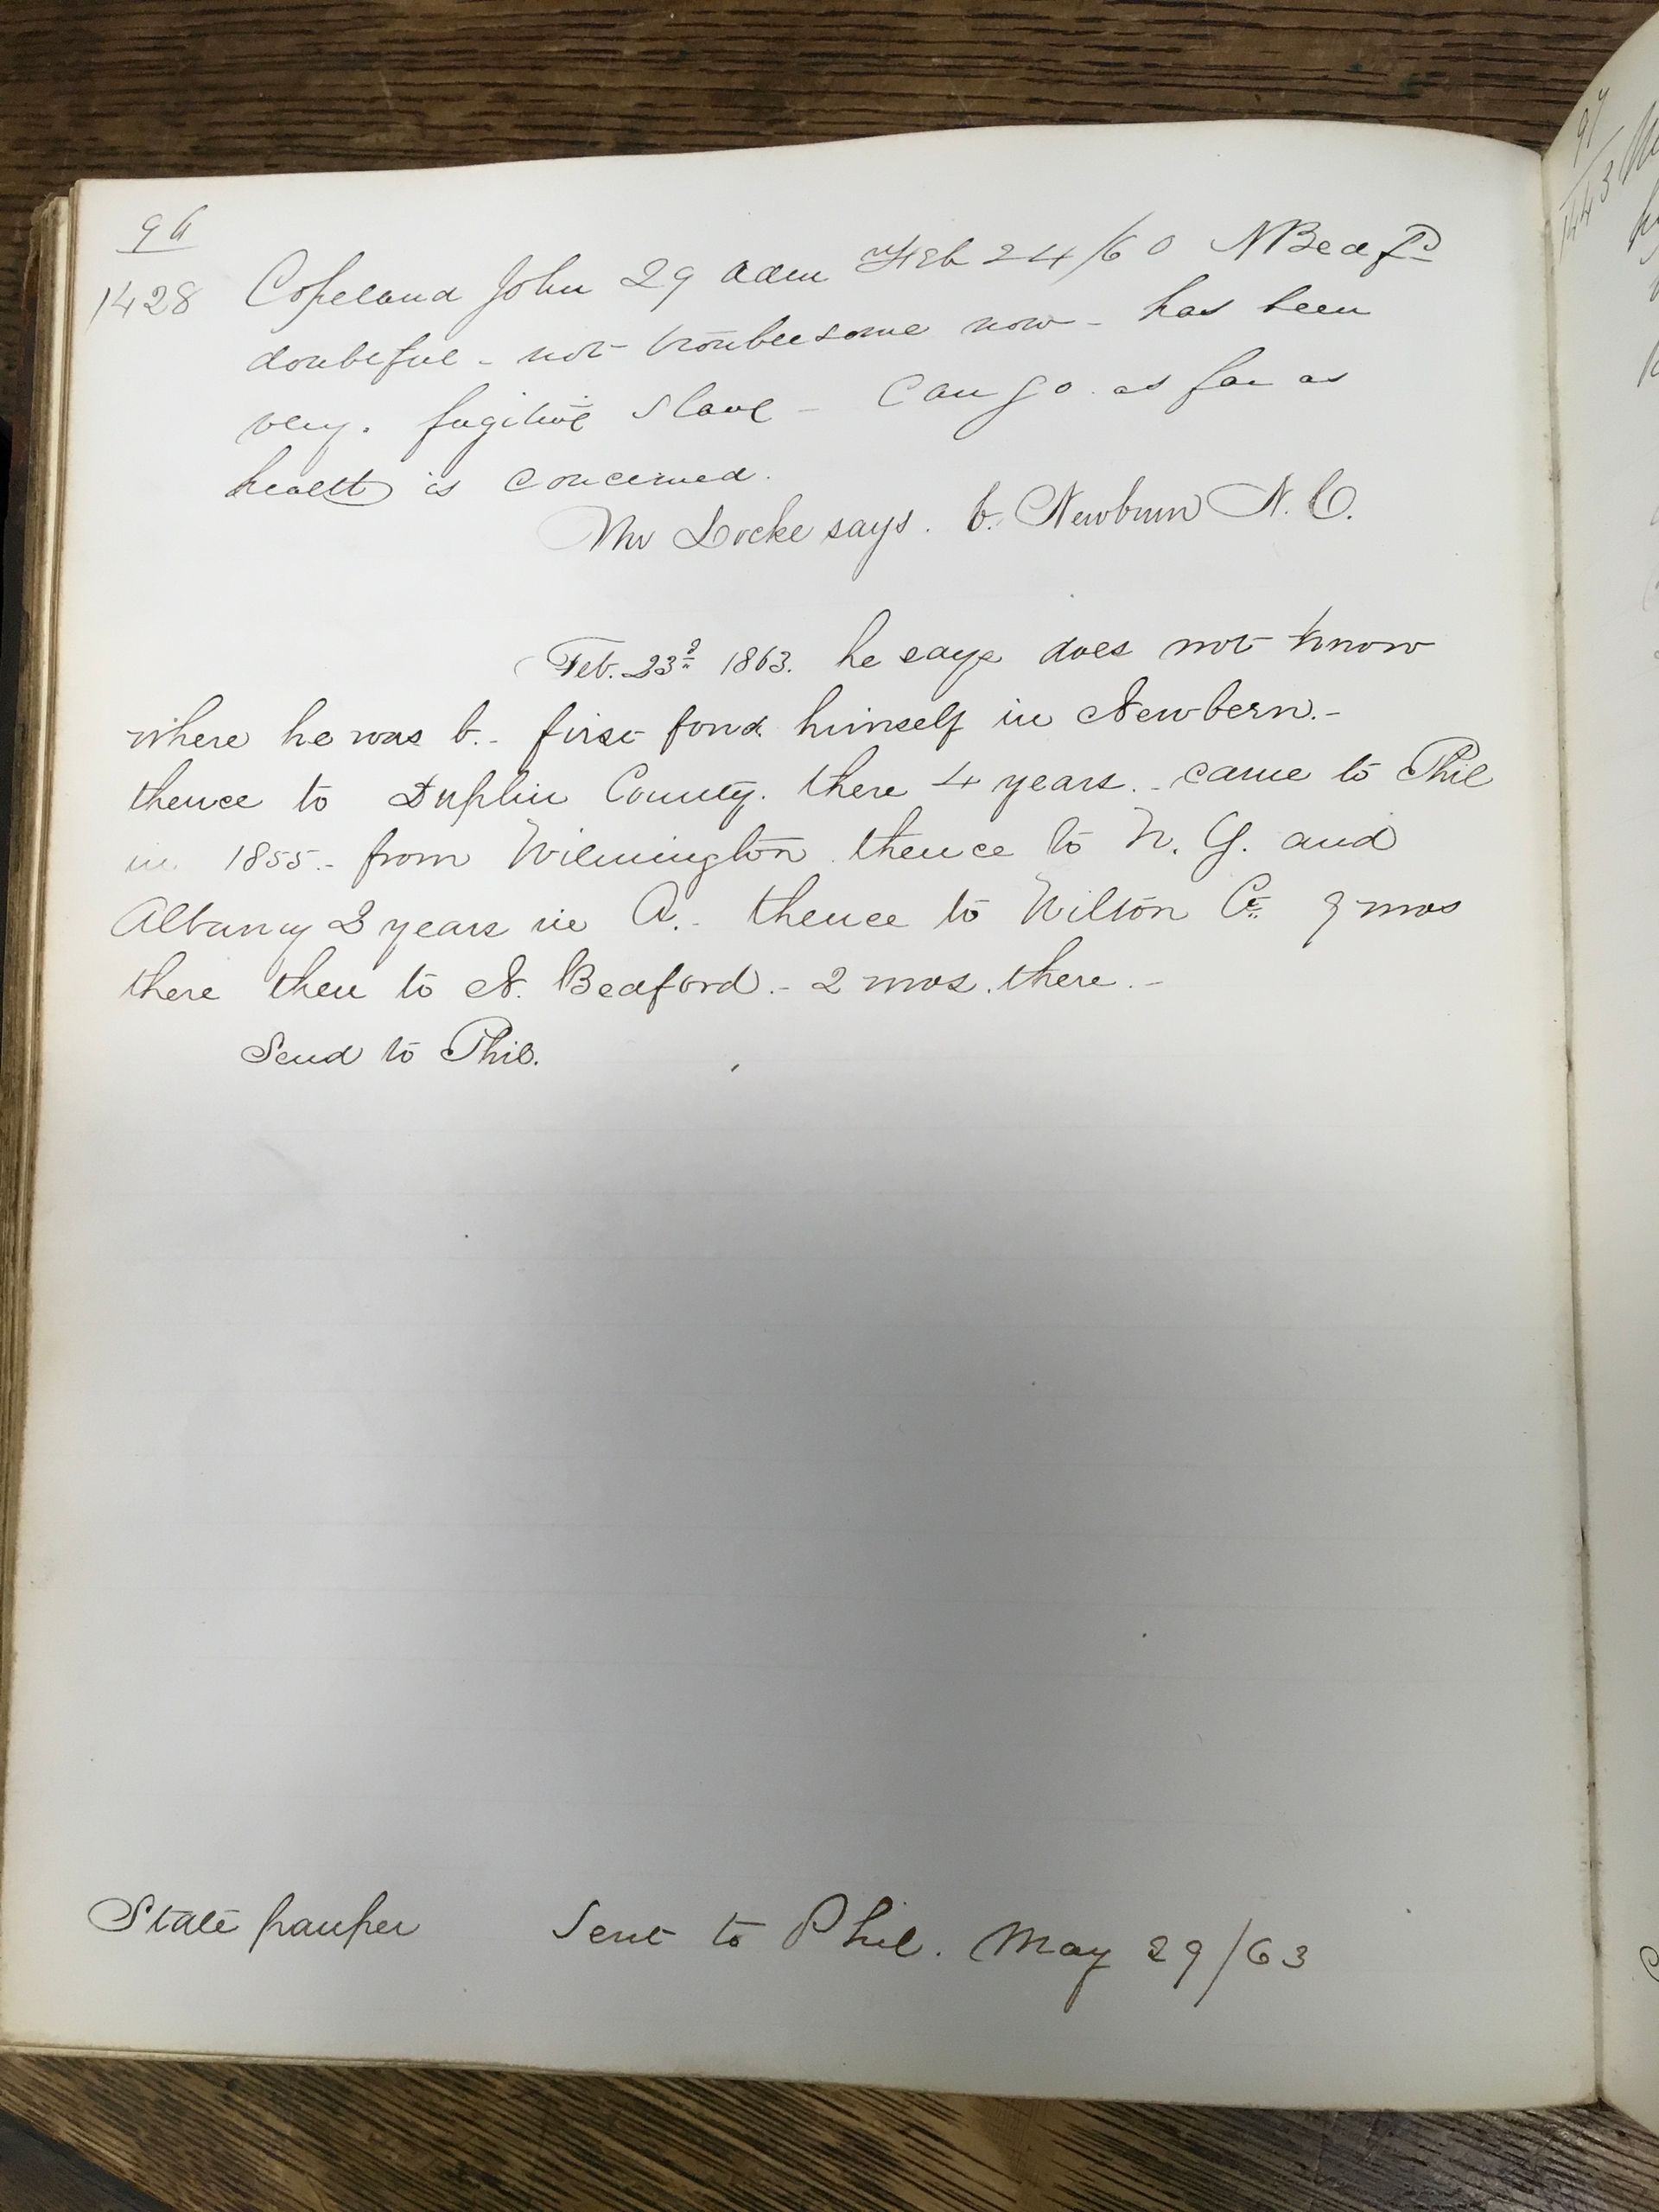 Page from Taunton Lunatic Asylum casebook (1854 - 1868), MSS 6/011, Historical Medical Library of The College of Physicians of Philadelphia.